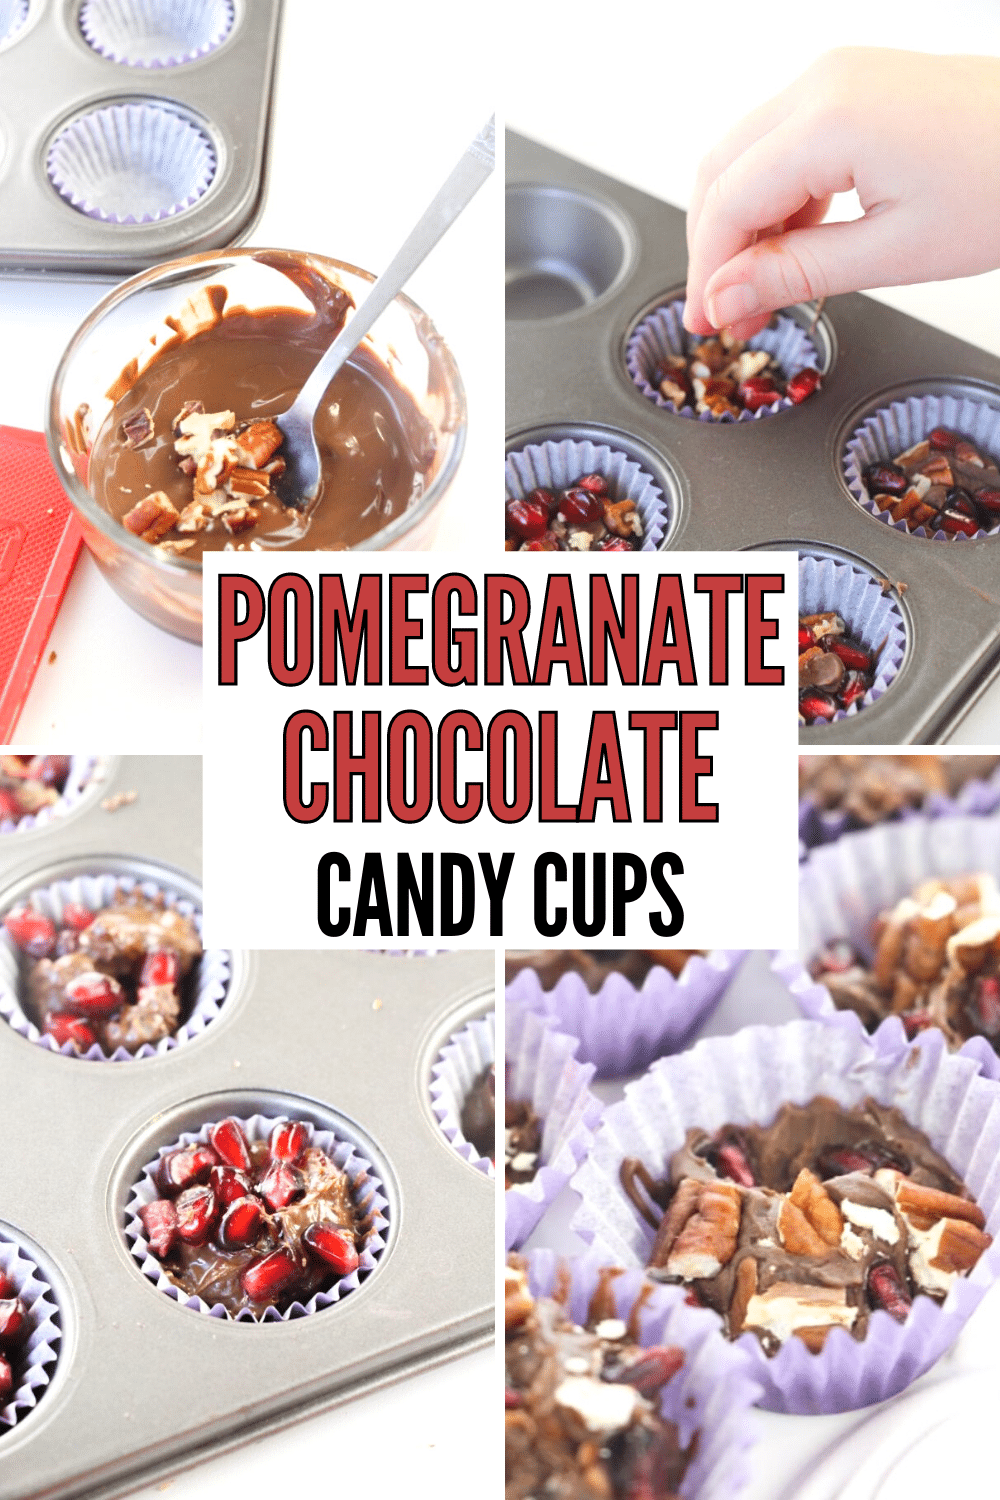 These Pomegranate Chocolate Candy Cups make beautiful appetizers and are simple to make. A dessert recipe that brings out the flavors of the pomegranates! #dessert #3ingredients #pomegranates via @wondermomwannab